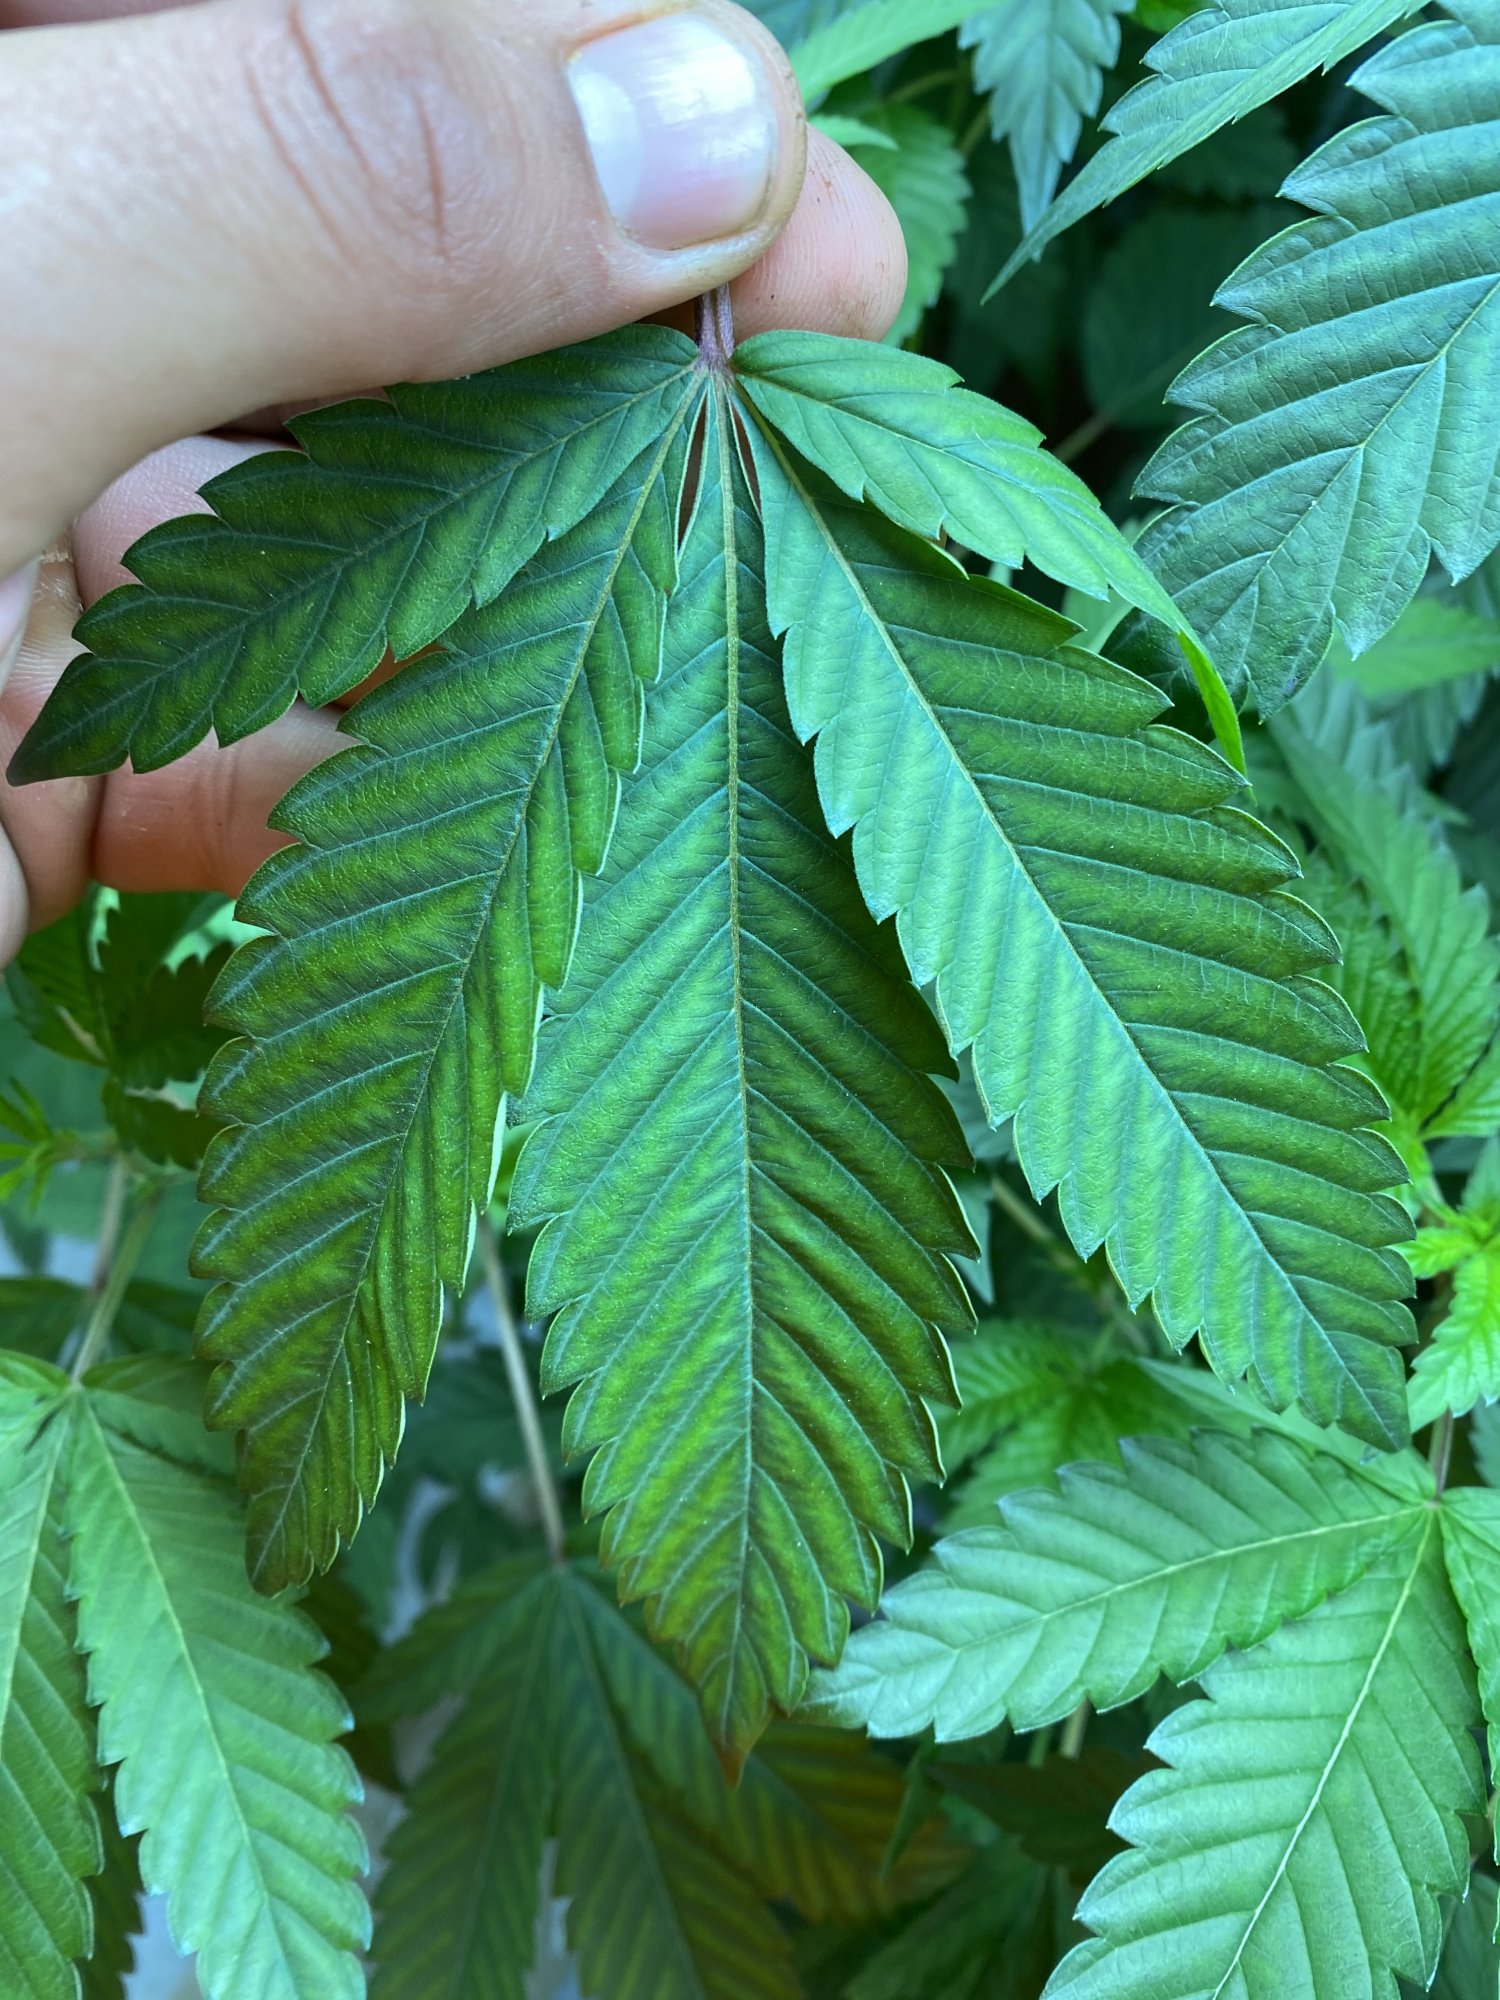 Second opinion on deficiency